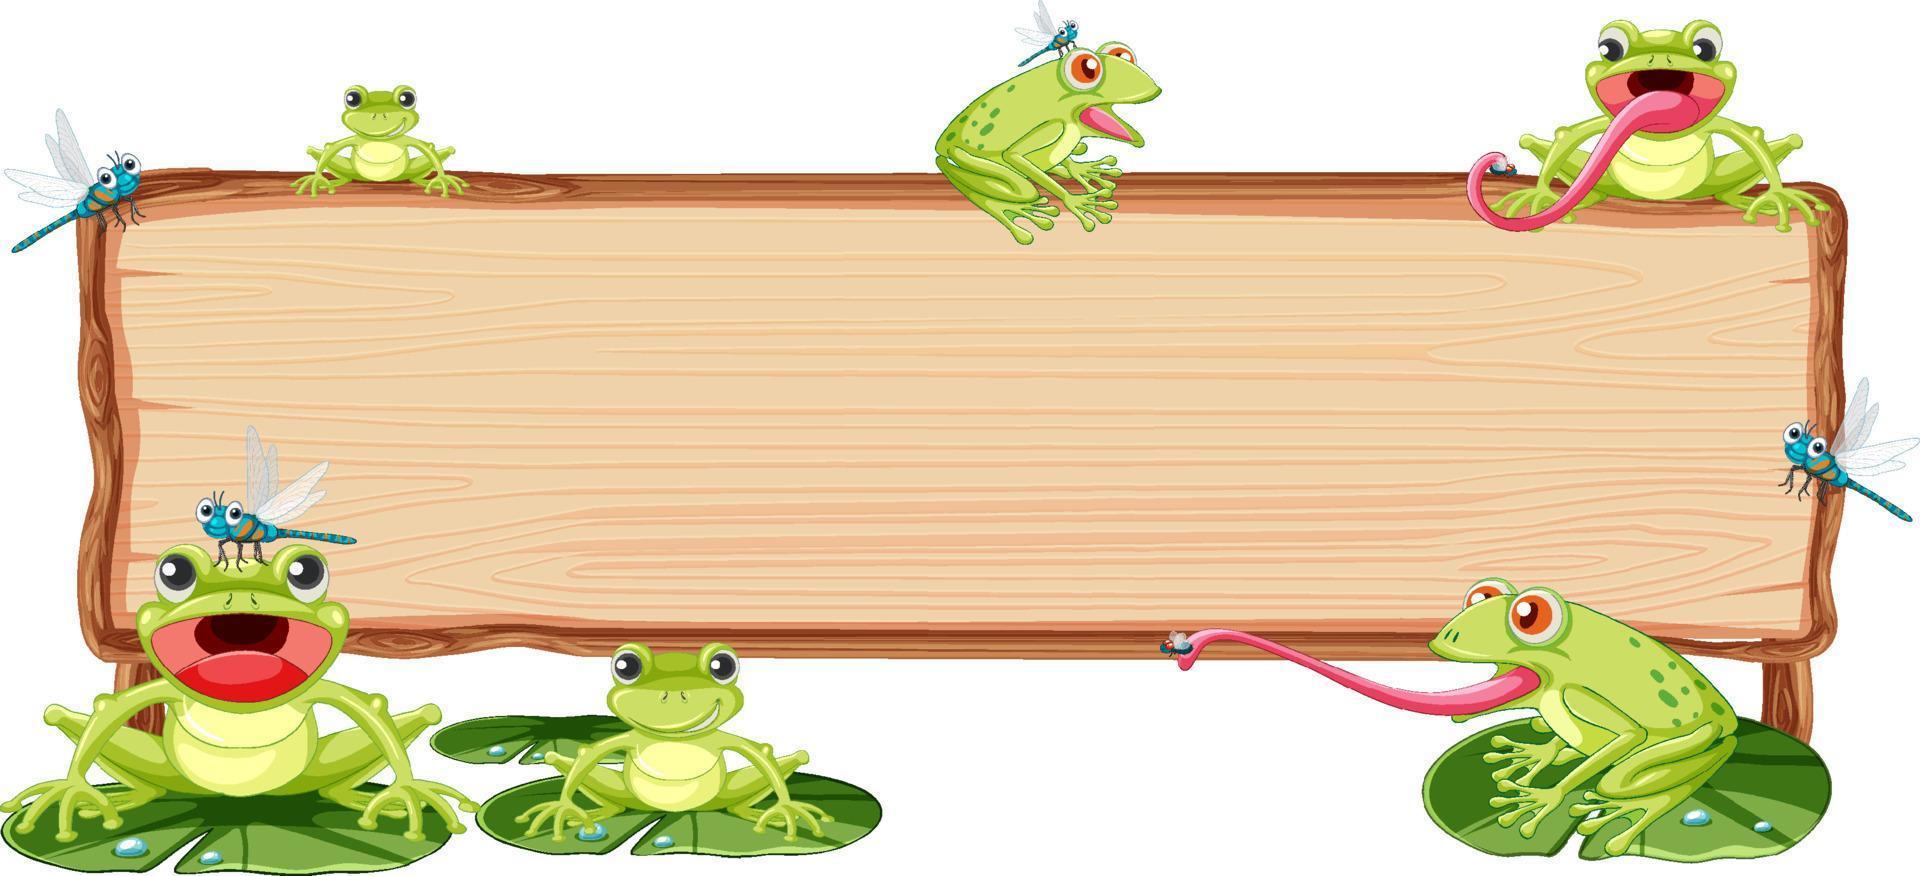 Blank wooden signboard with frogs vector